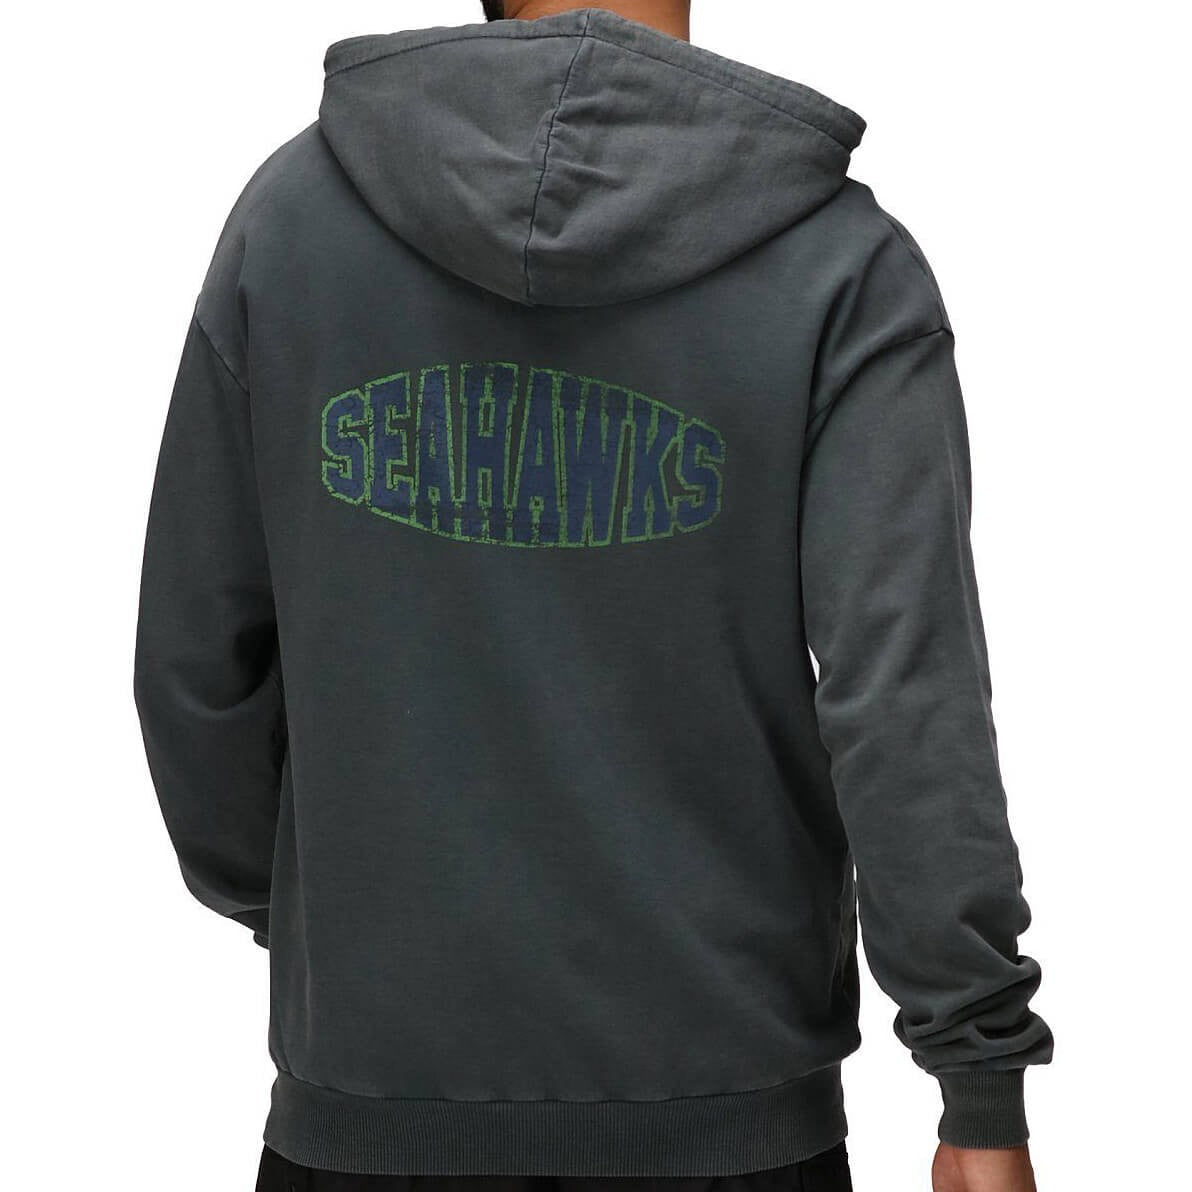 Re:Covered NFL Helmet Chest / College Backprint Hoody Seattle Seahawks Washed Black